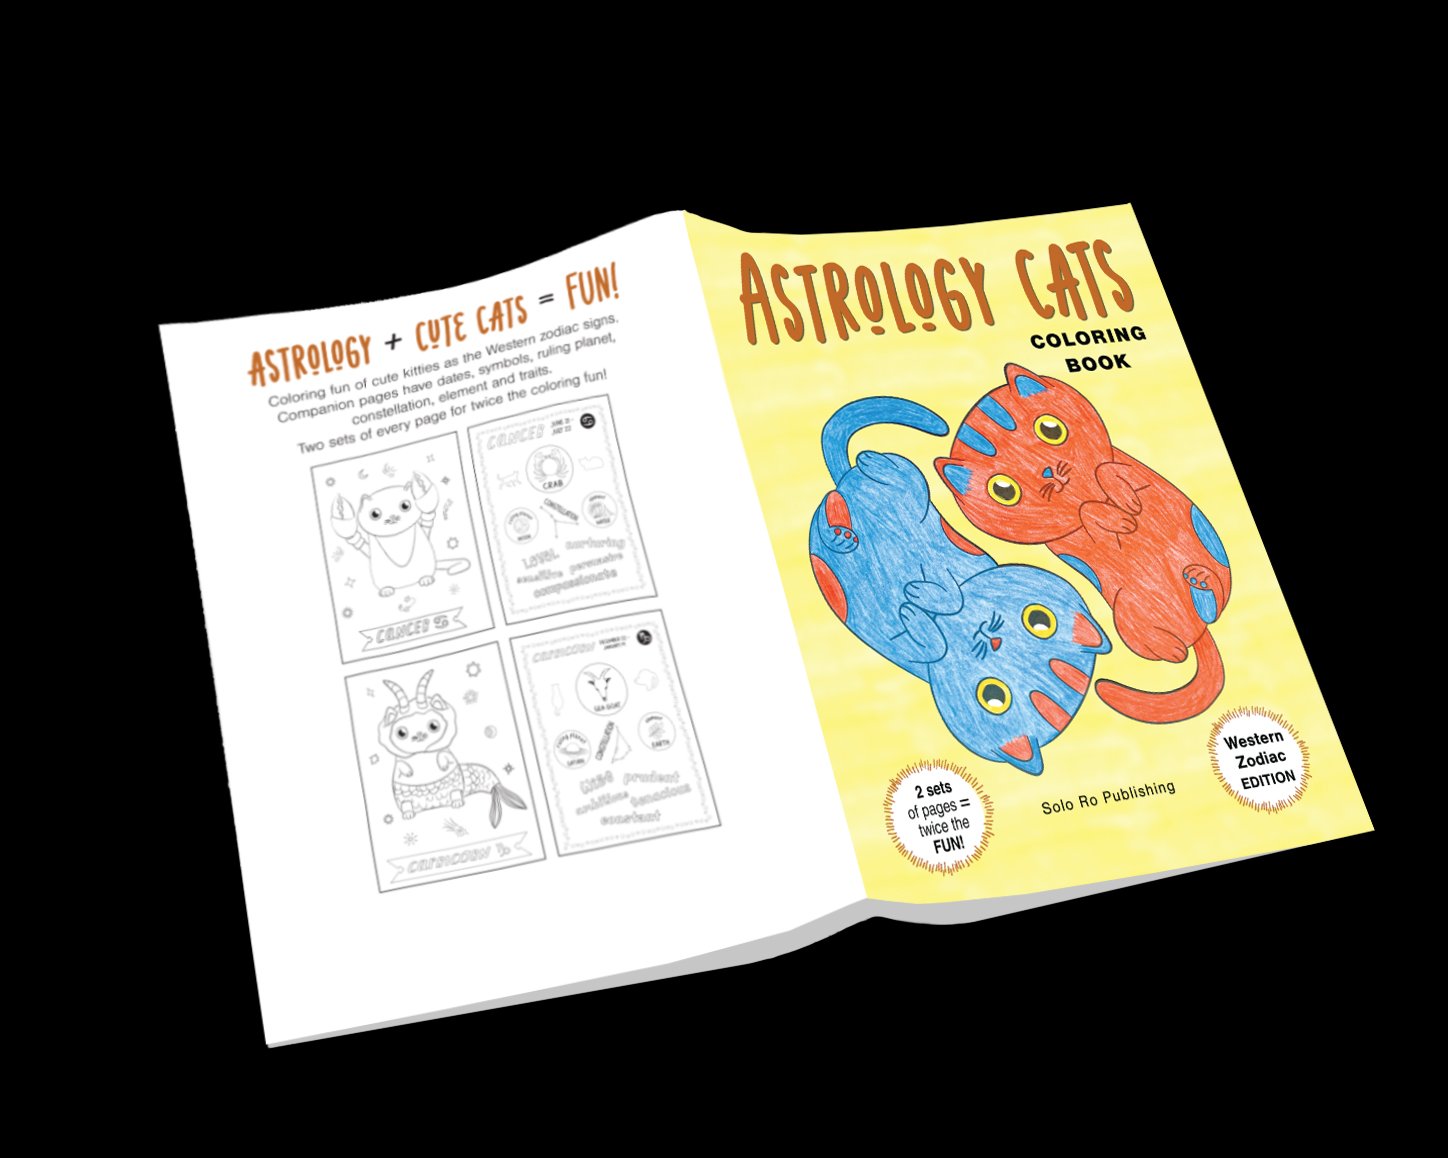 astrology cats coloring book Western zodiac.jpg